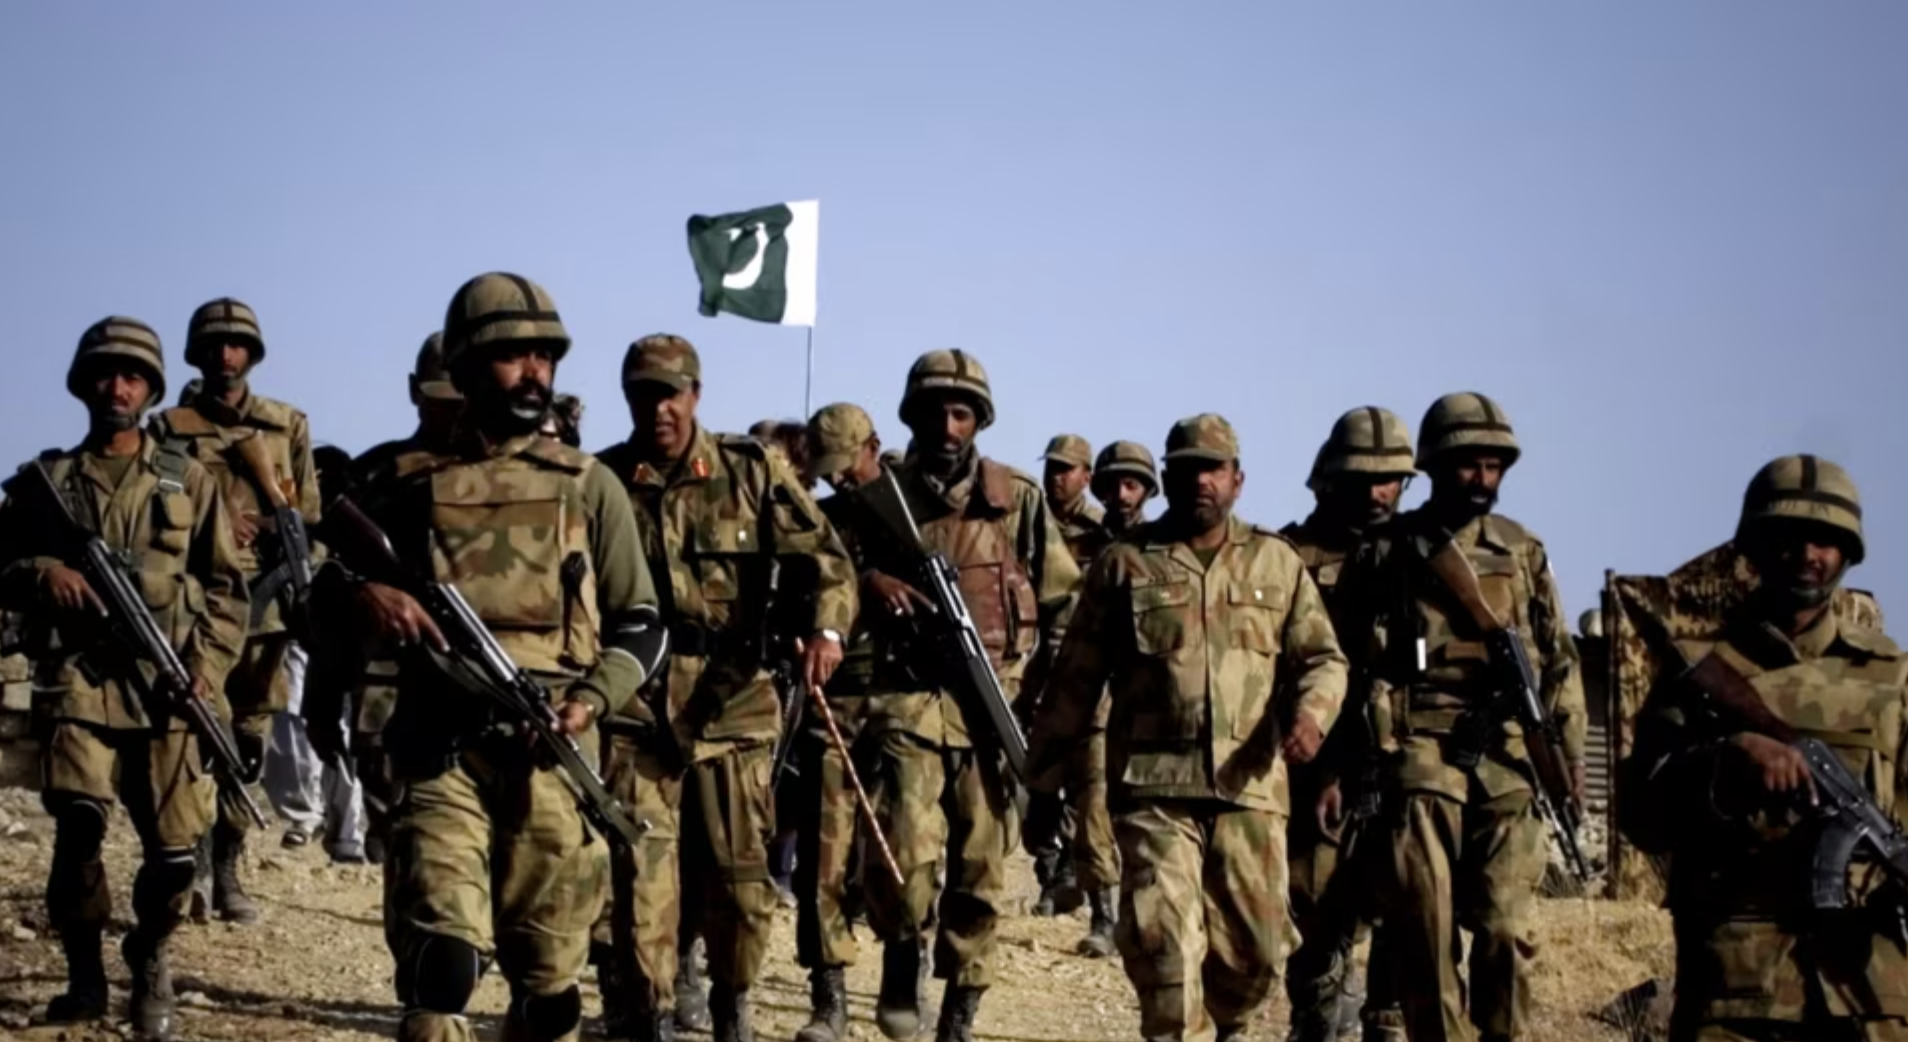 Pakistani Youth Regard the Military with Fear rather than Security. Here’s Why.